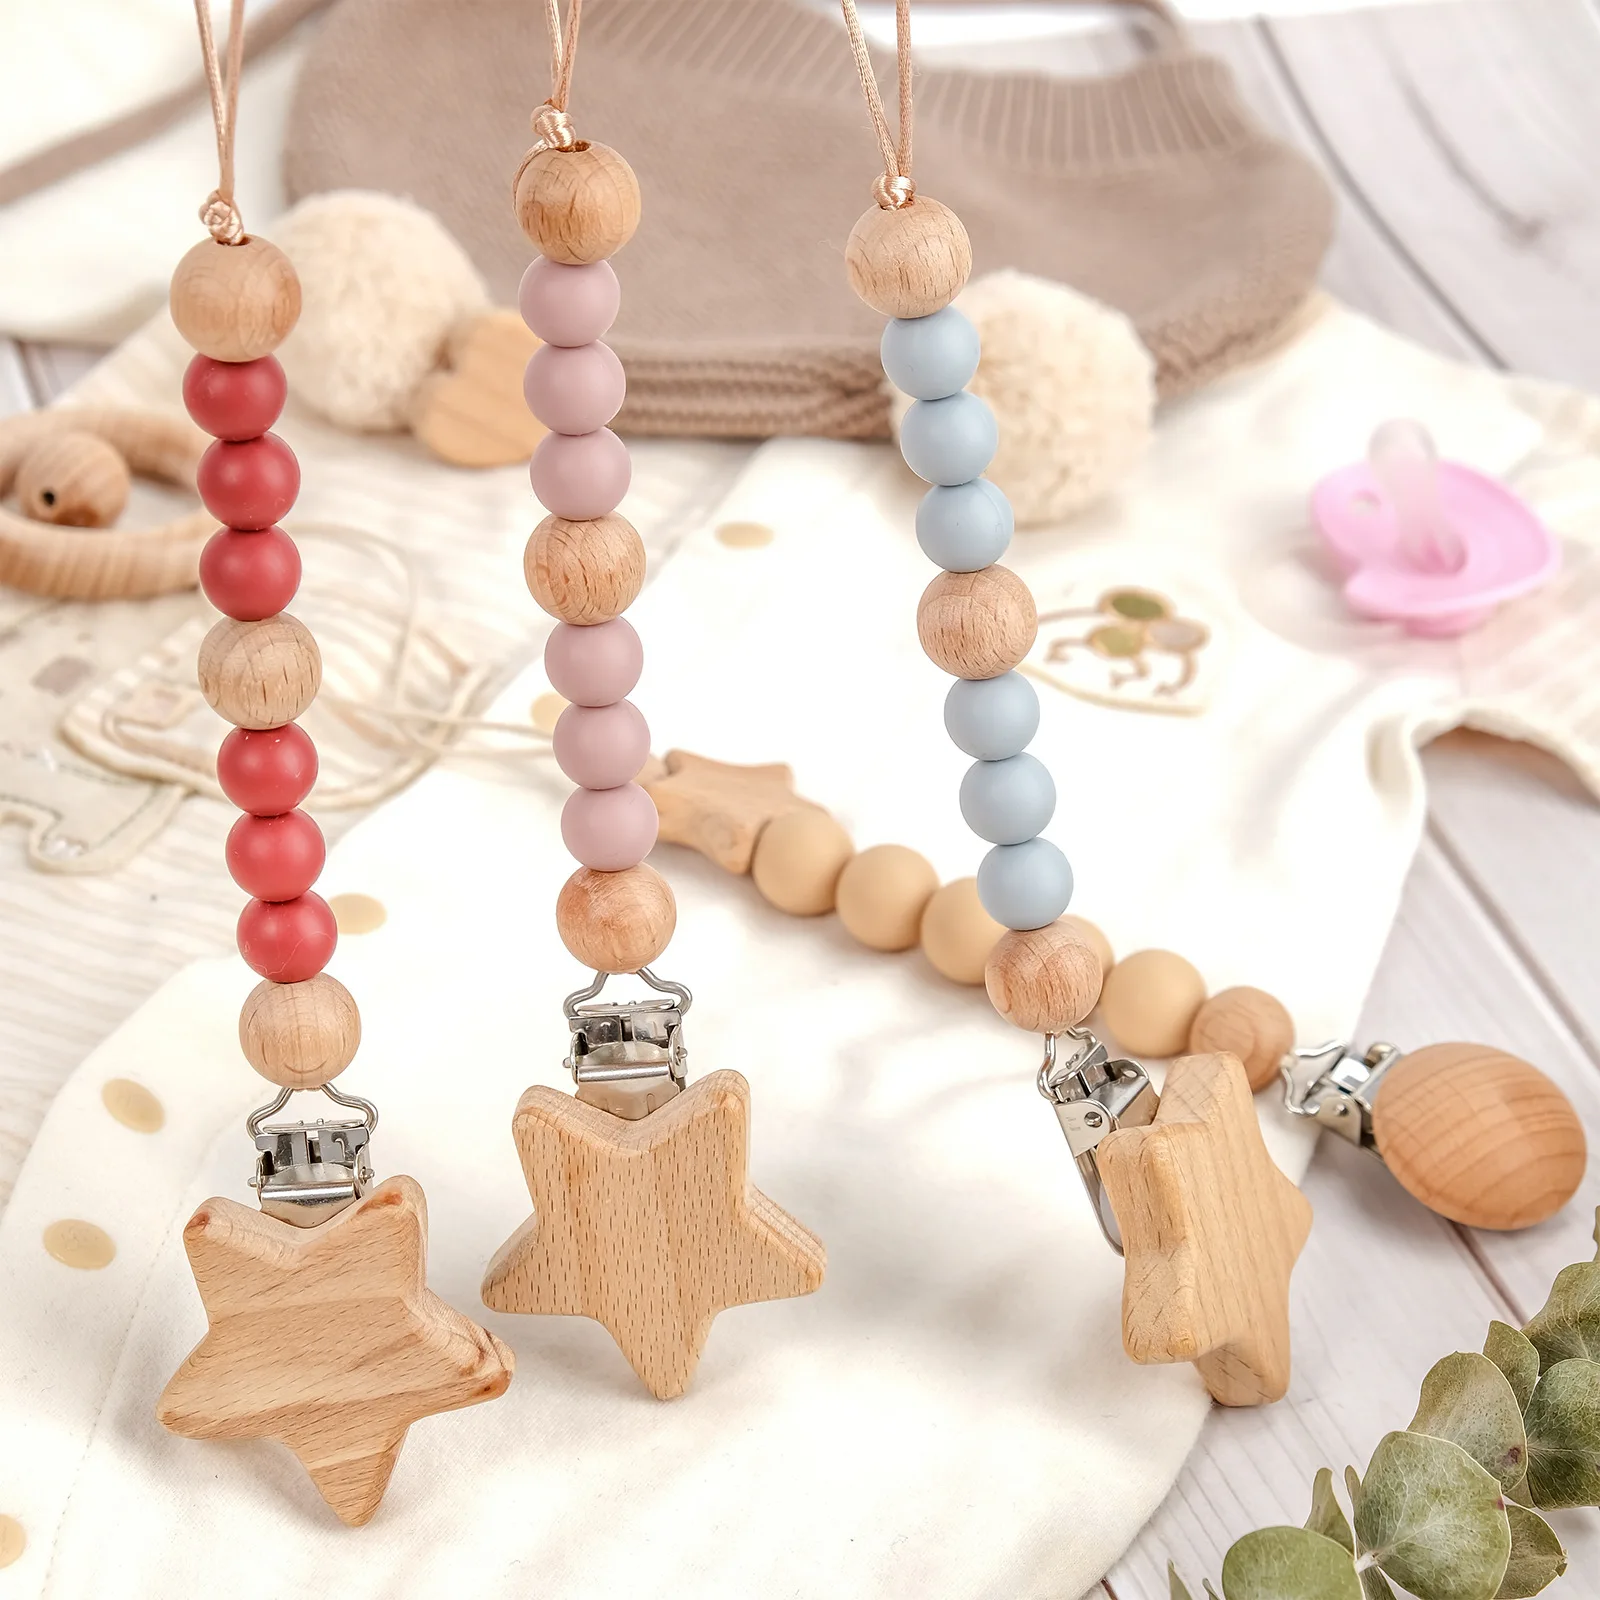 Wooden Silicone Pacifier Clips Holders Paci Clip Teething Relief with Neutral Baby Binky Holder Baby Shower and Gift